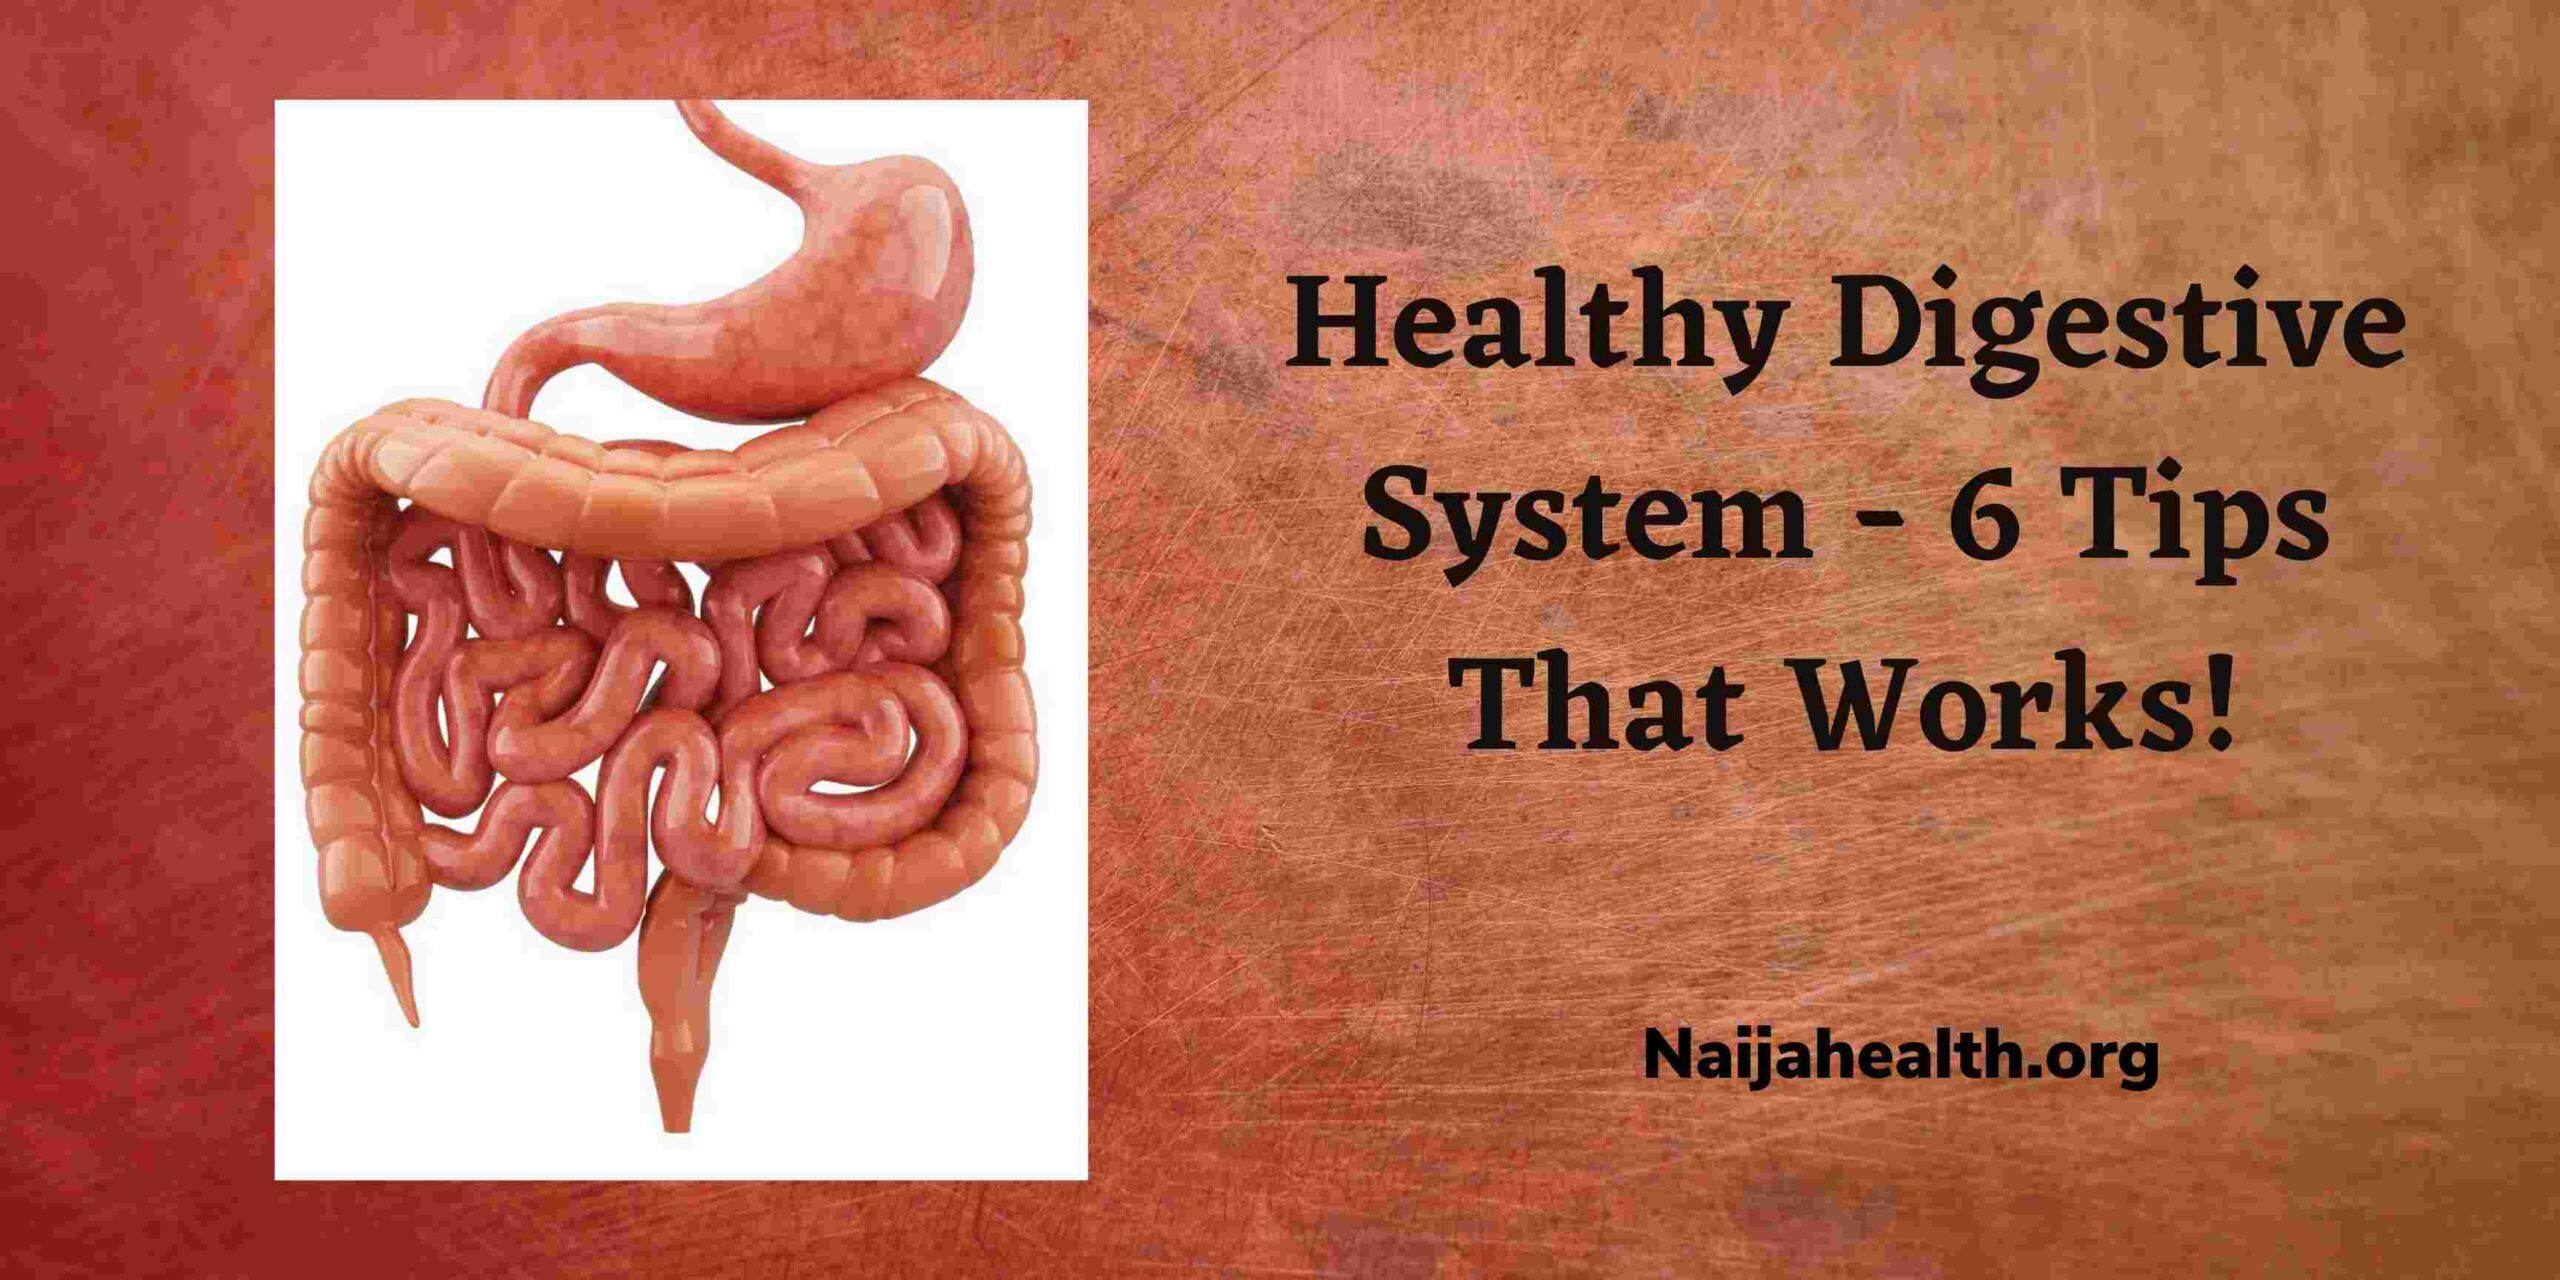 Healthy Digestive System - 6 Tips That Works!